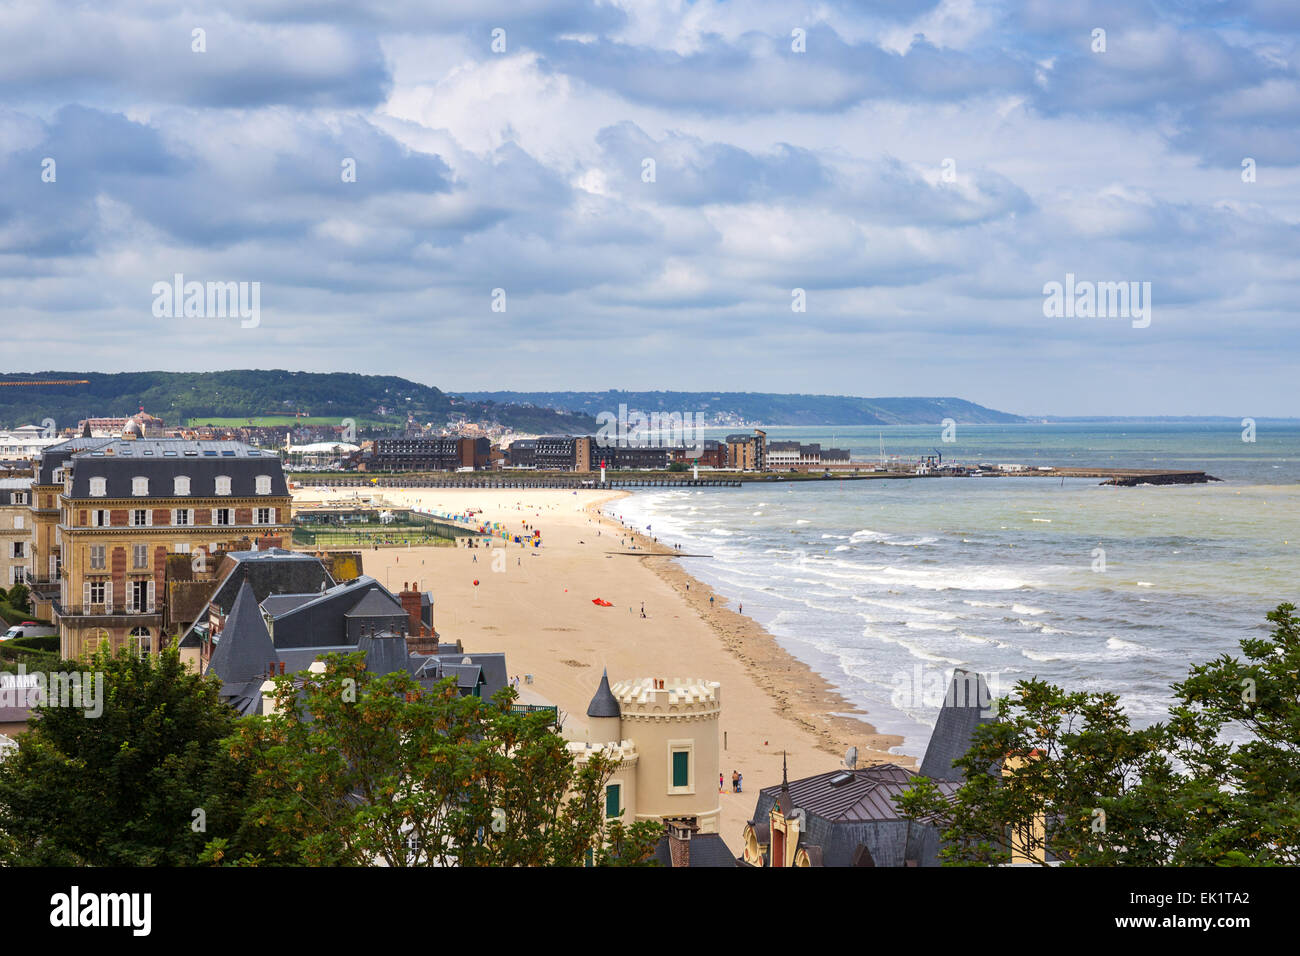 France, Calvados, Trouville sur Mer, view of the buildings and the beach Stock Photo